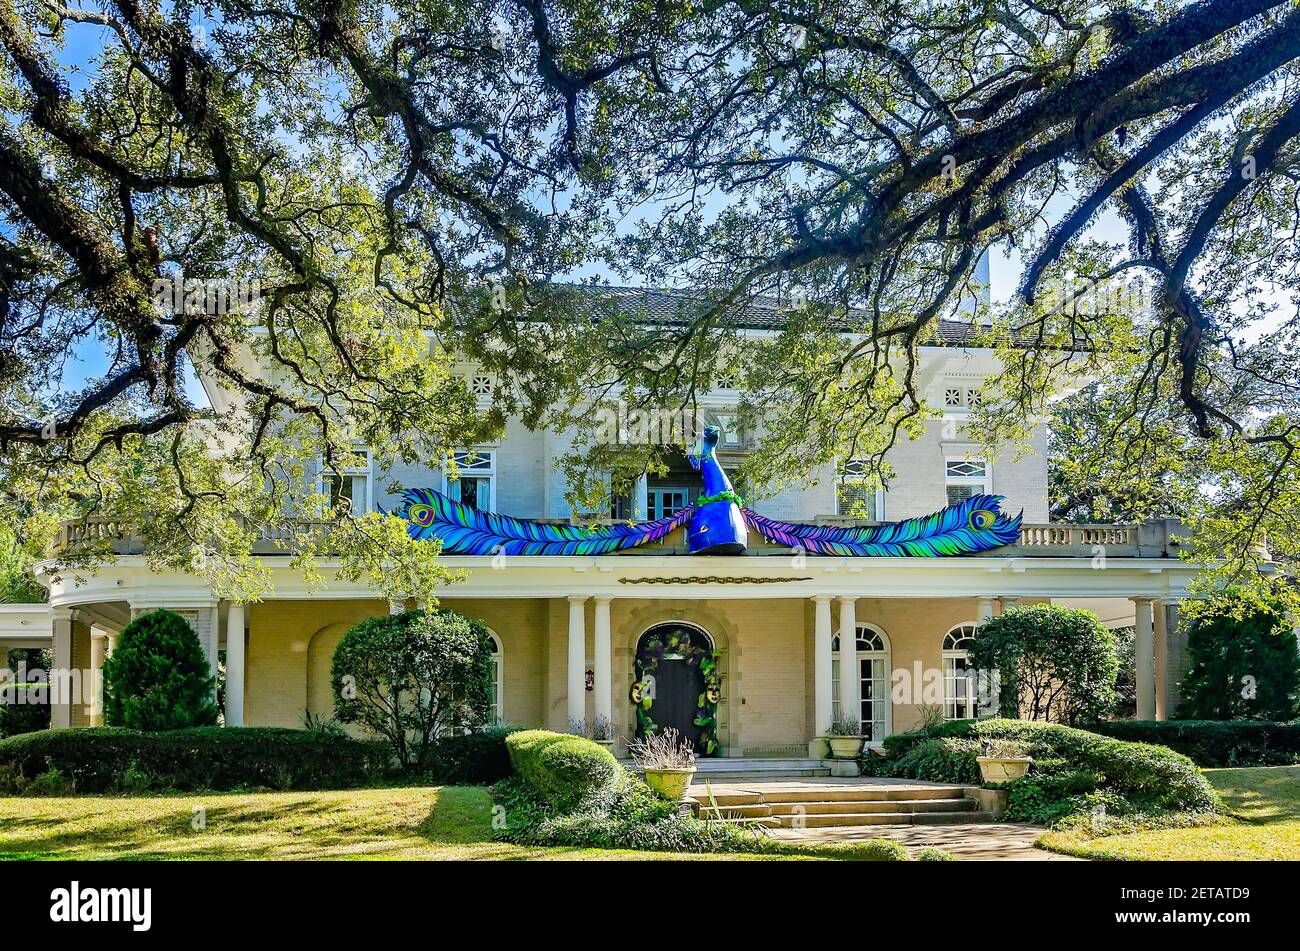 The Burgess-Maschmeyer Mansion is decorated with a peacock for Mardi Gras on Government Street, Feb. 19, 2021, in Mobile, Alabama. Stock Photo